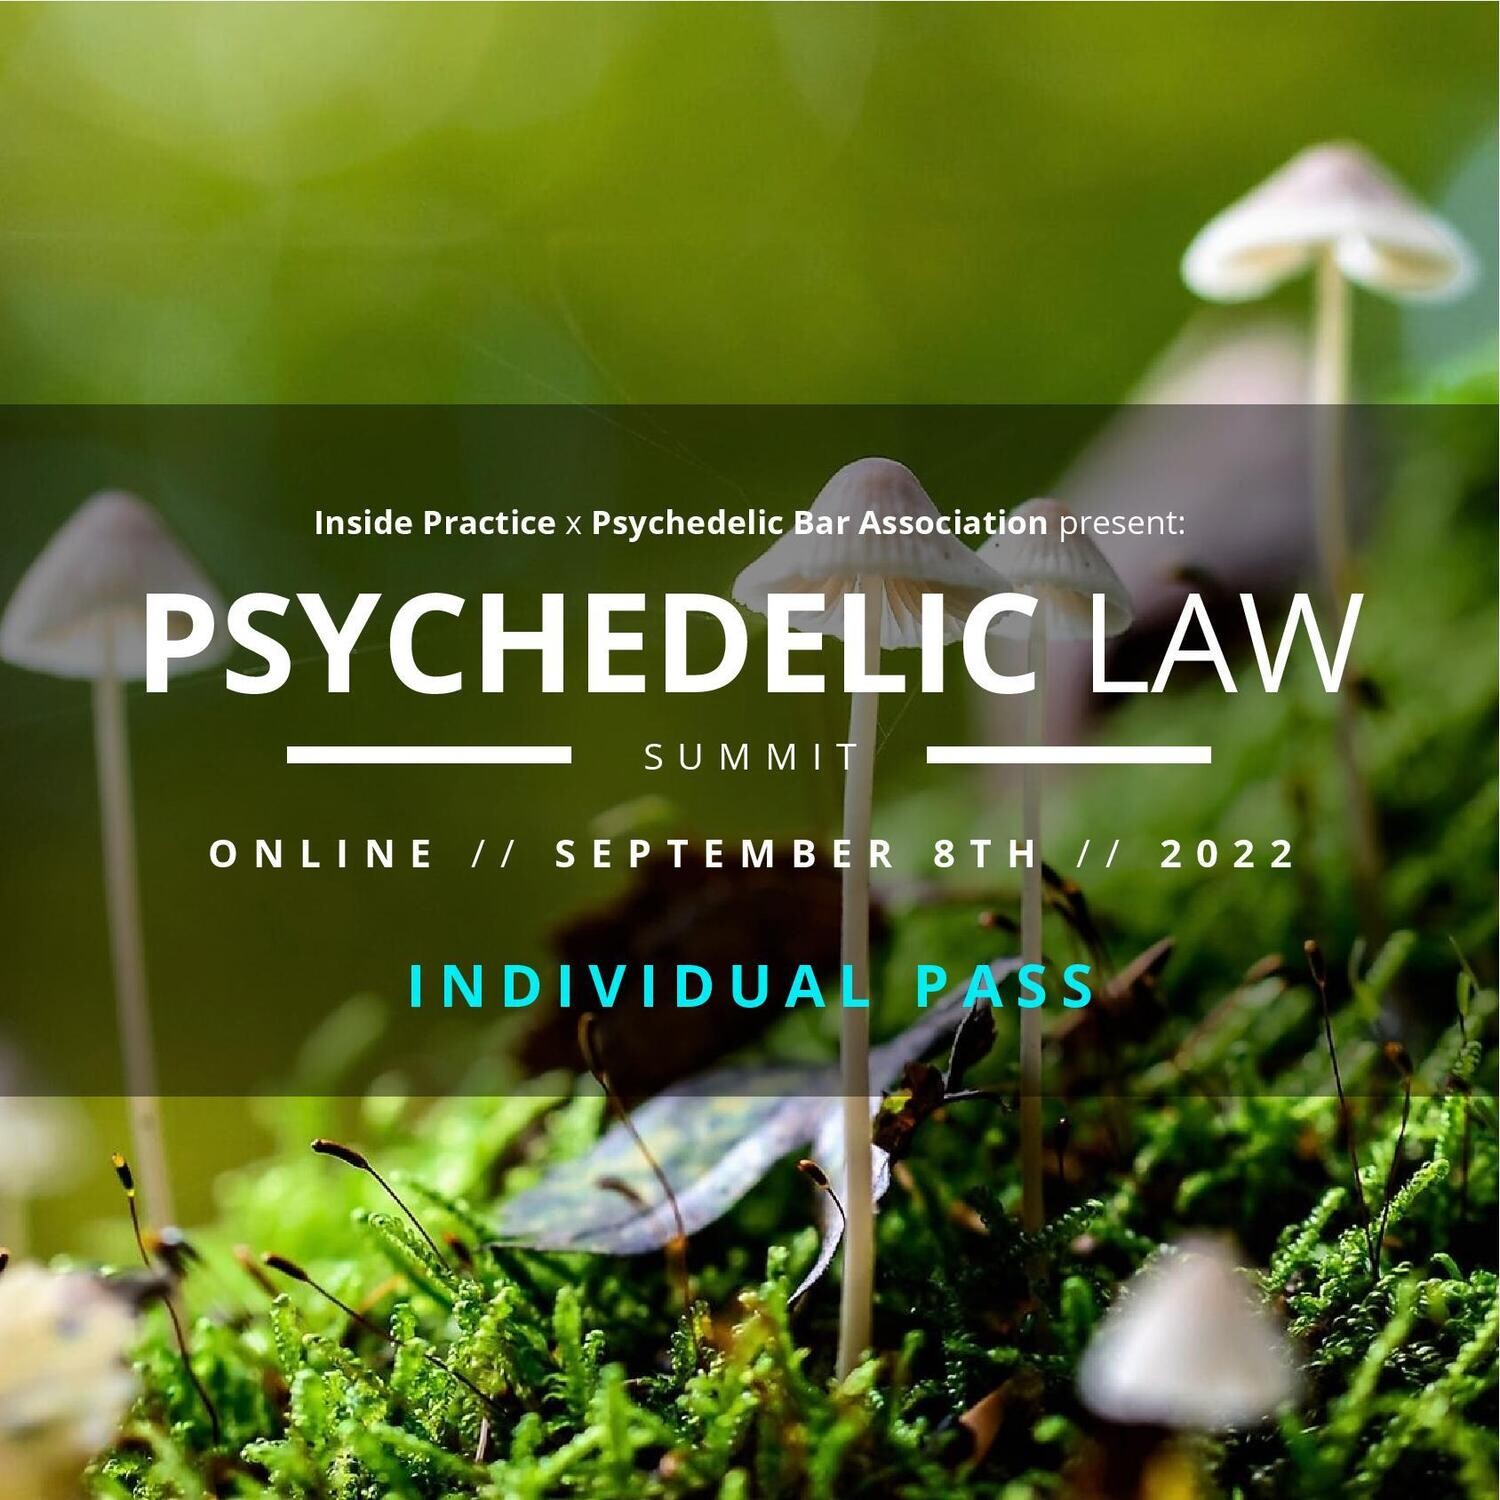 Psychedelic Law Summit Individual Registration